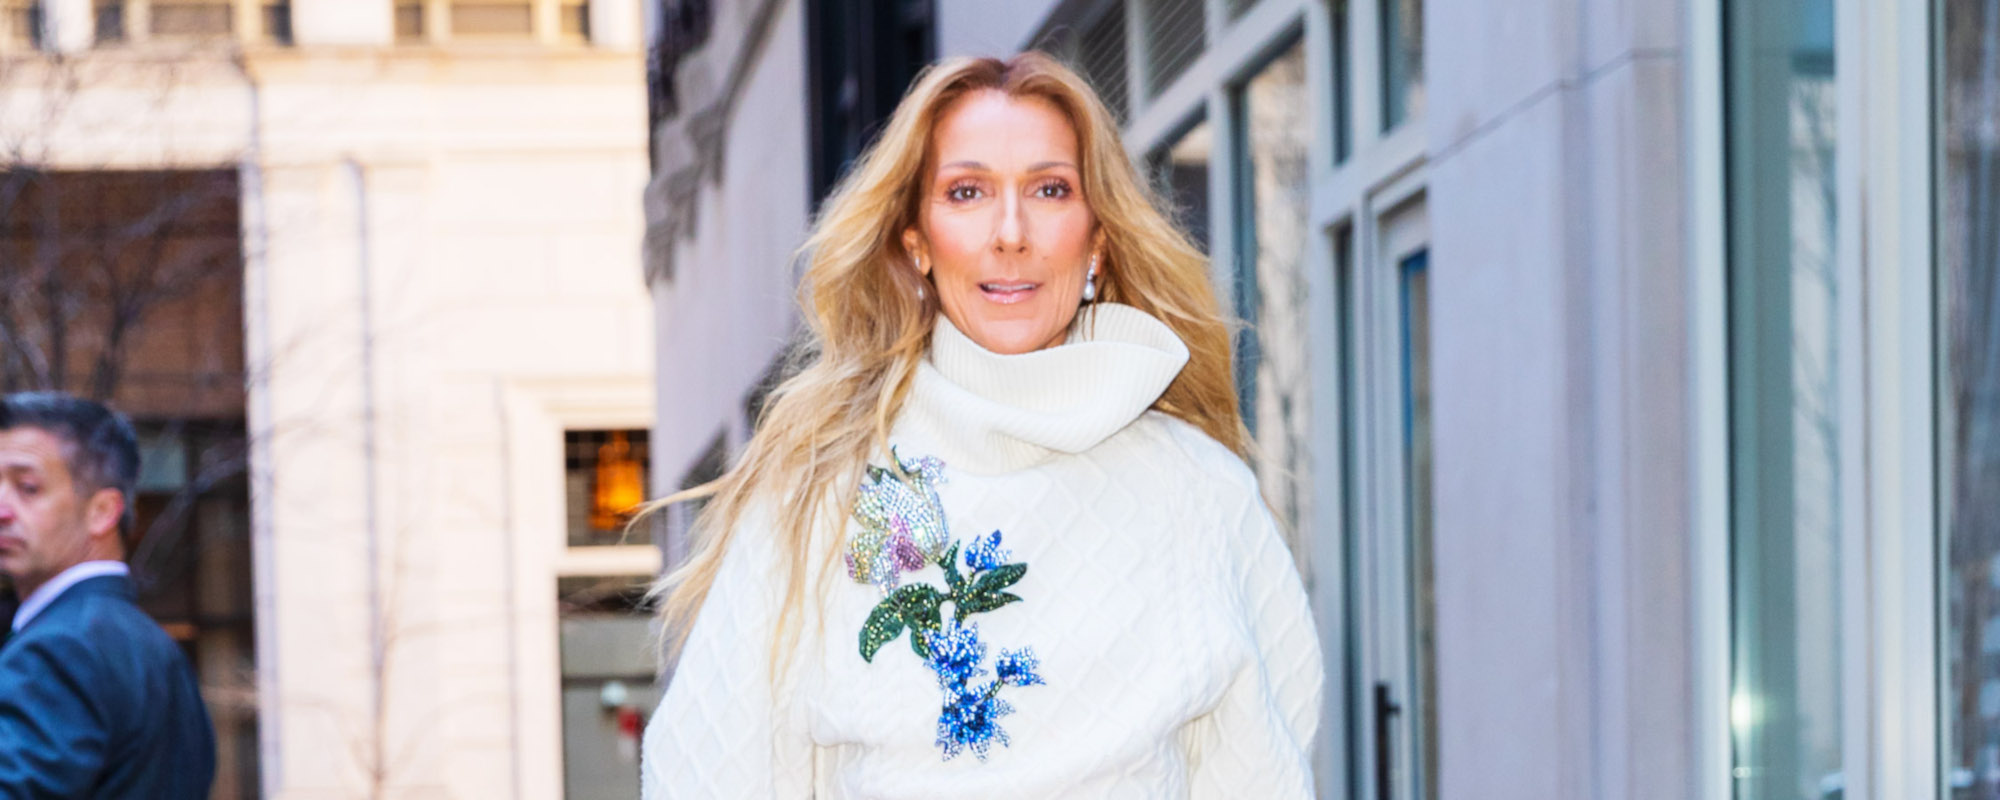 Celine Dion’s Sister Shares Health Update on Singer: “There’s Little We Can Do to Support Her”